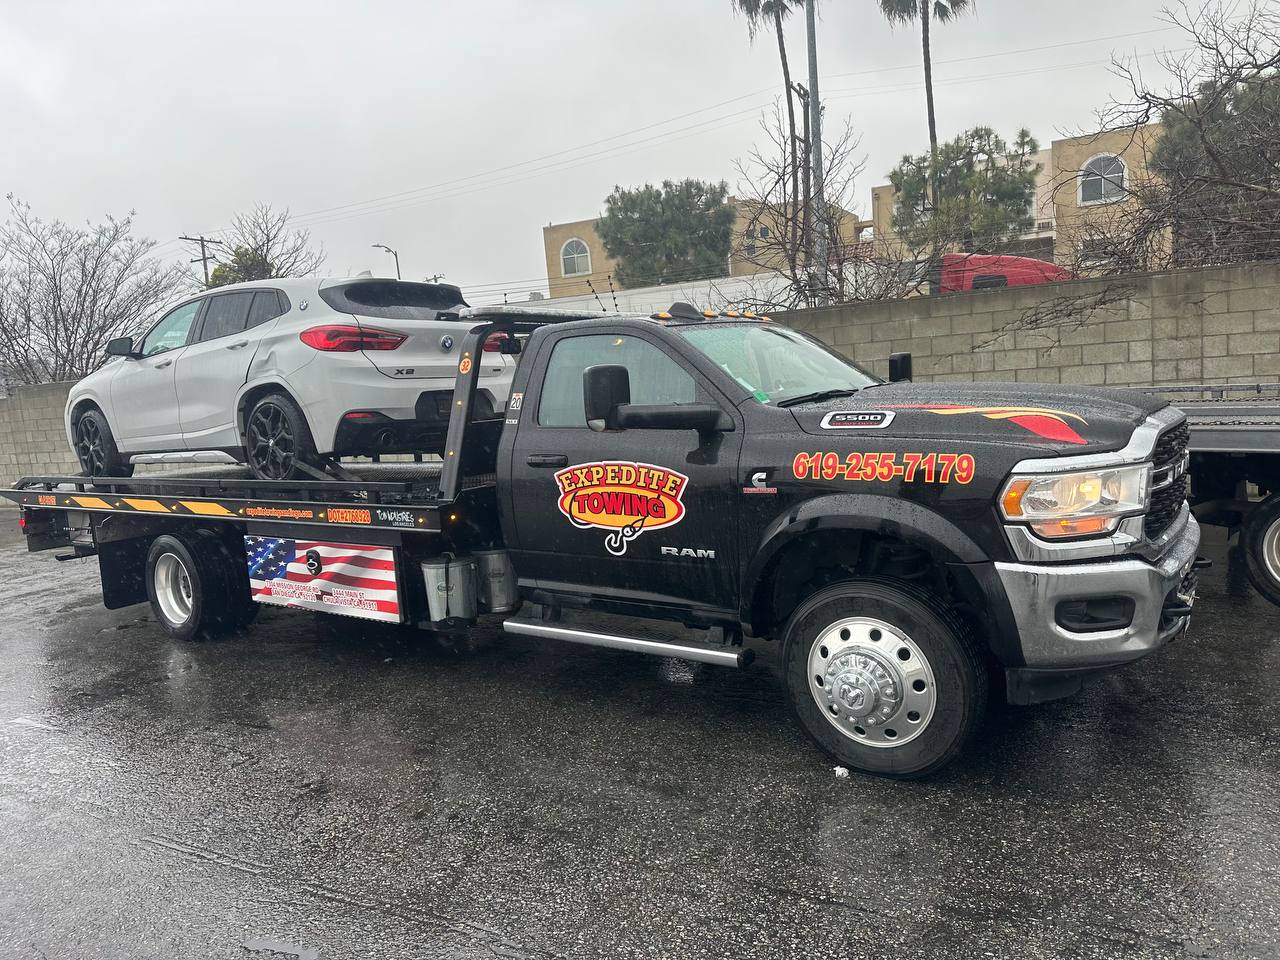 Why Choose Flatbed Towing Service for Your Luxury or Classic Car